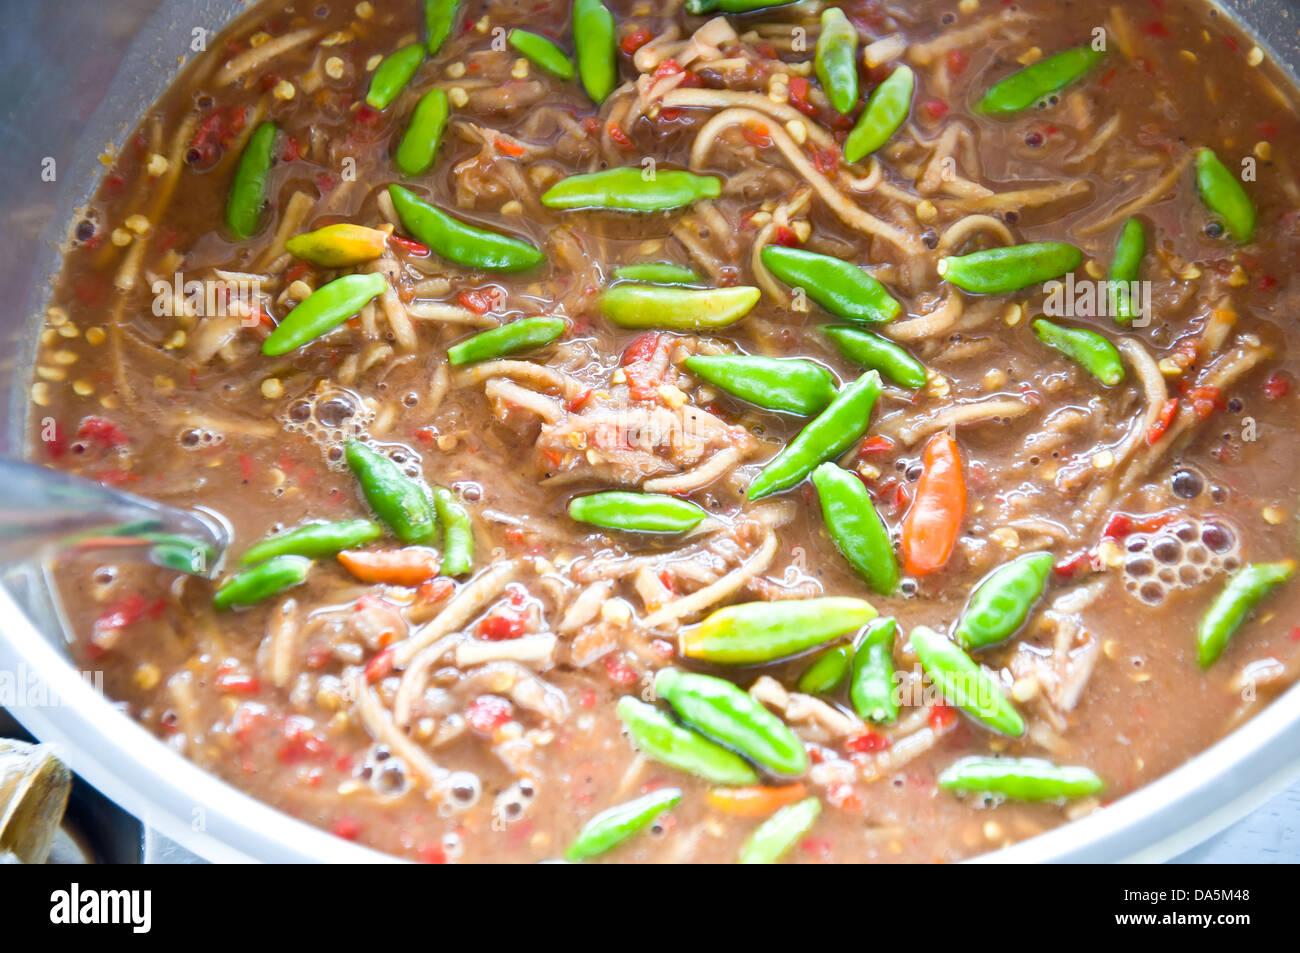 Thai food call NAMPRIK spicy food in Thailand eat with vegetable Stock Photo